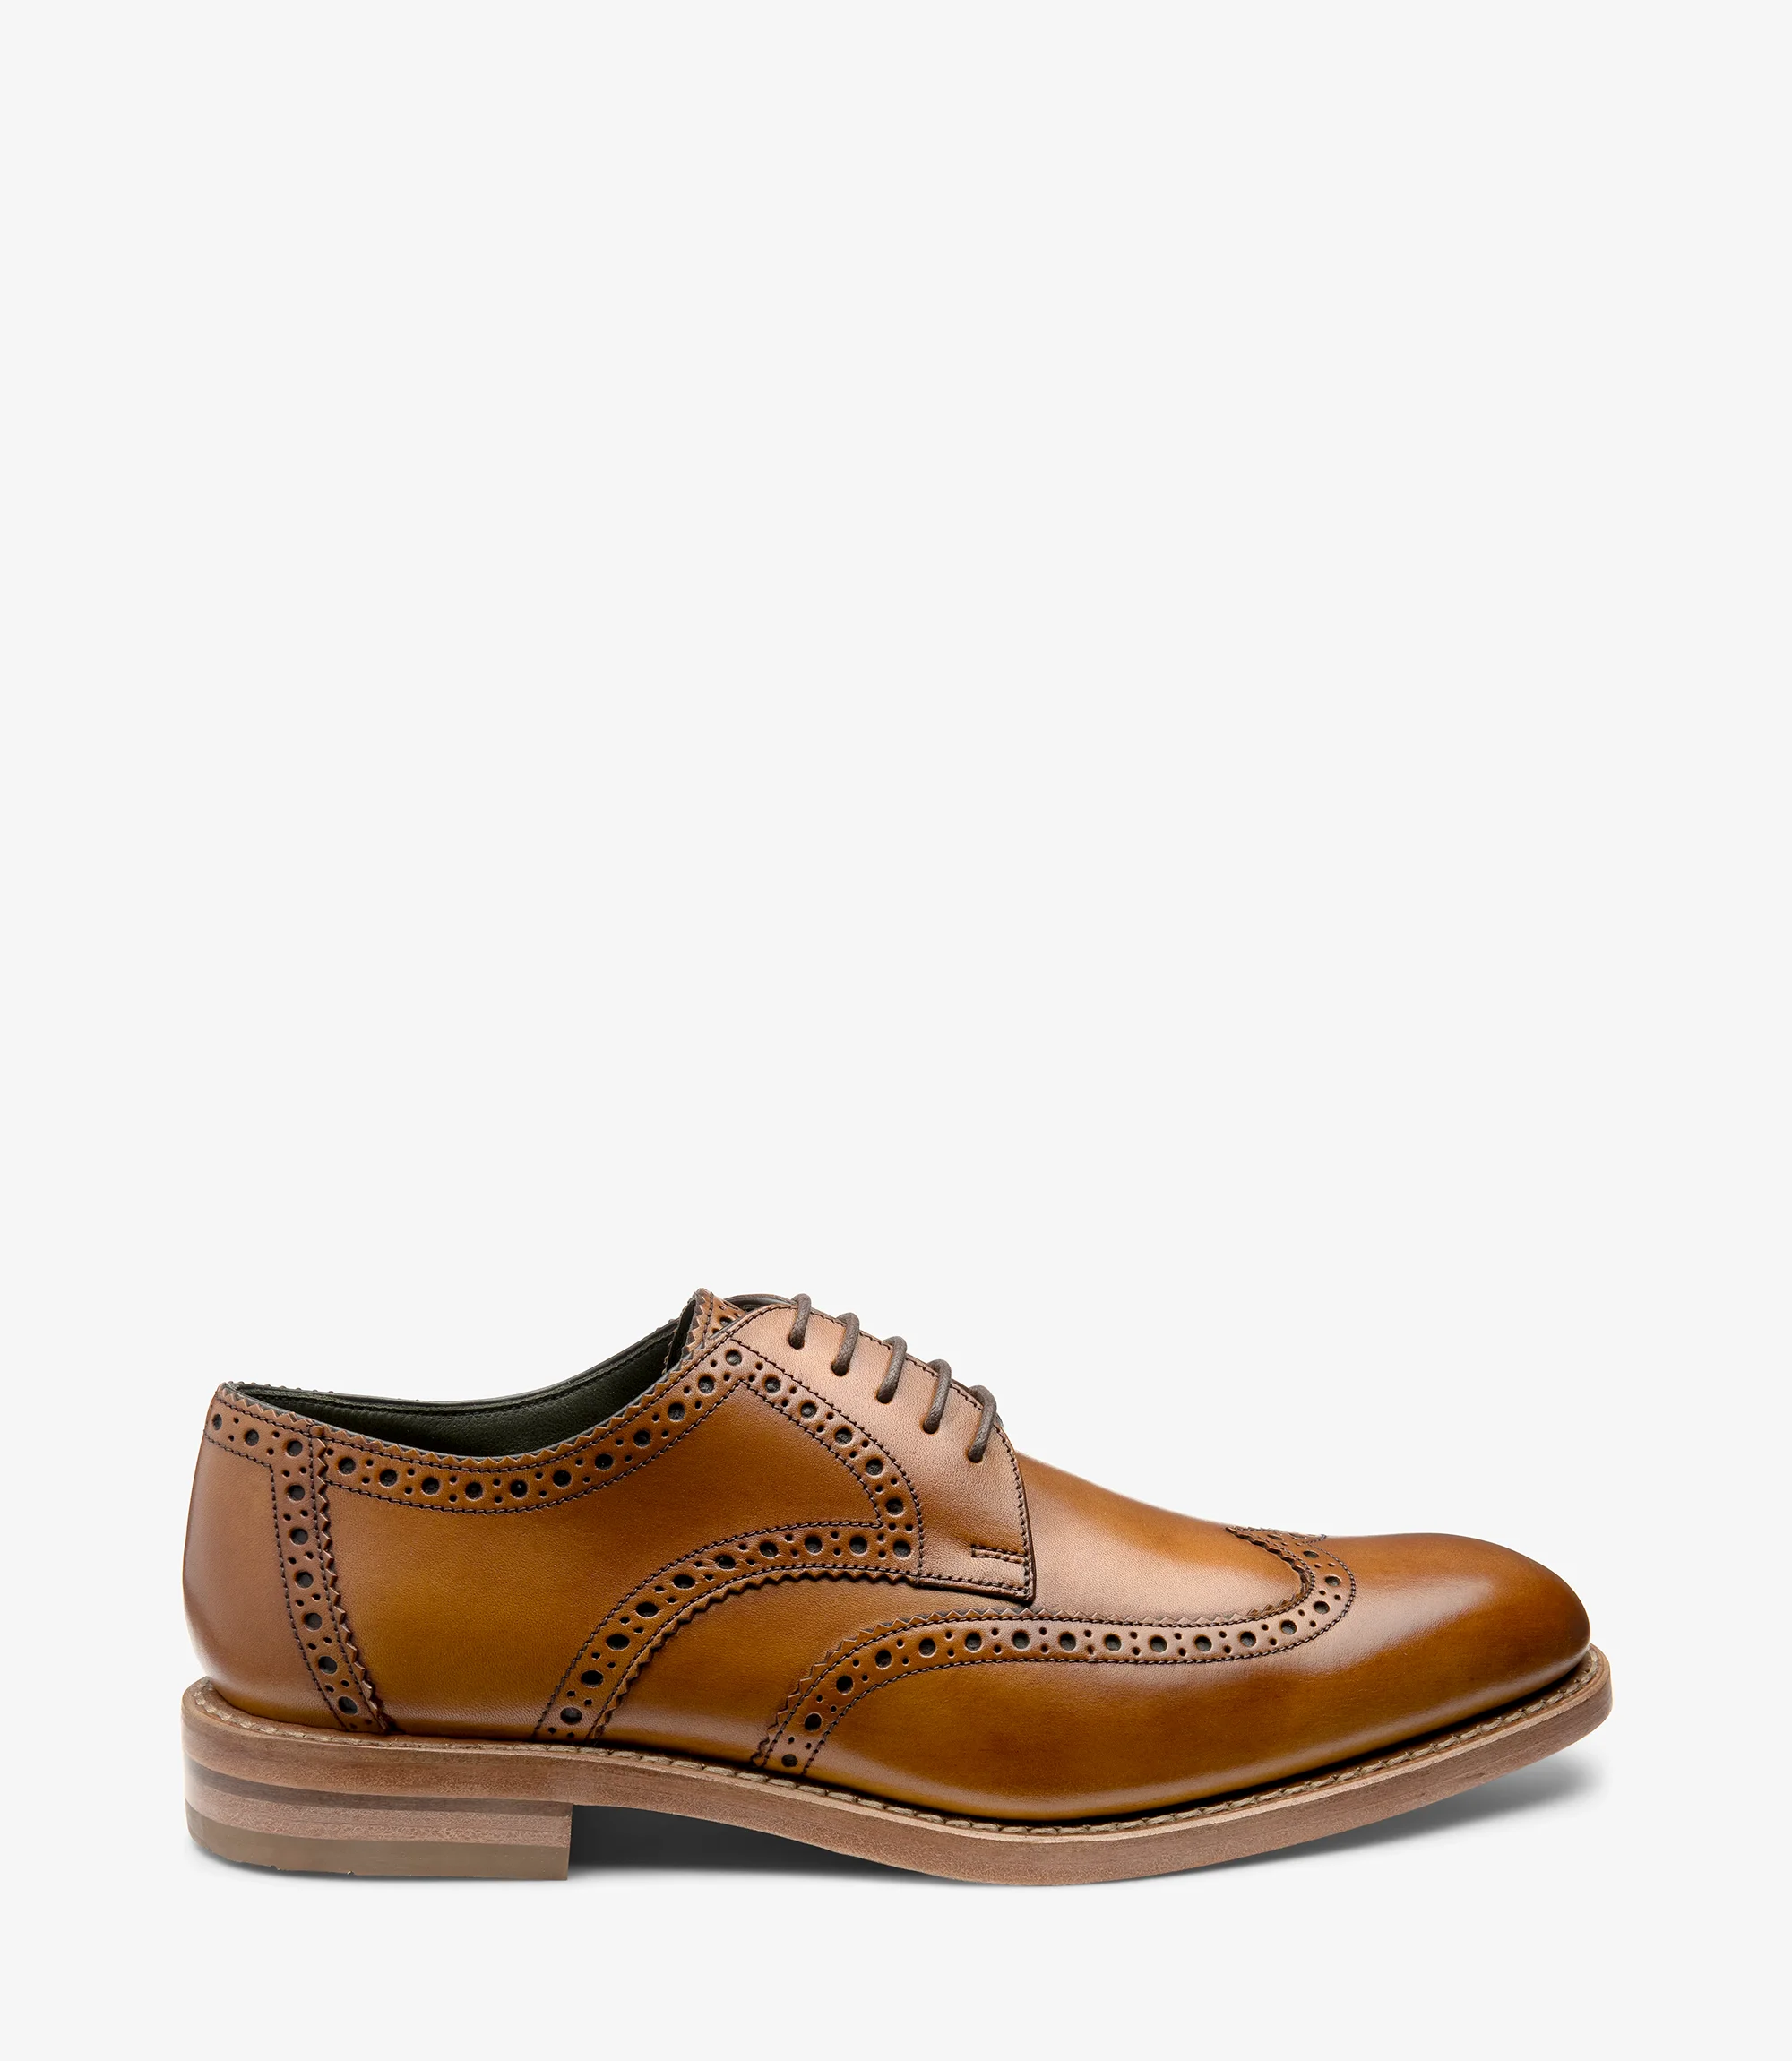 Design by Loake Shoemakers | English Made Shoes & Boots